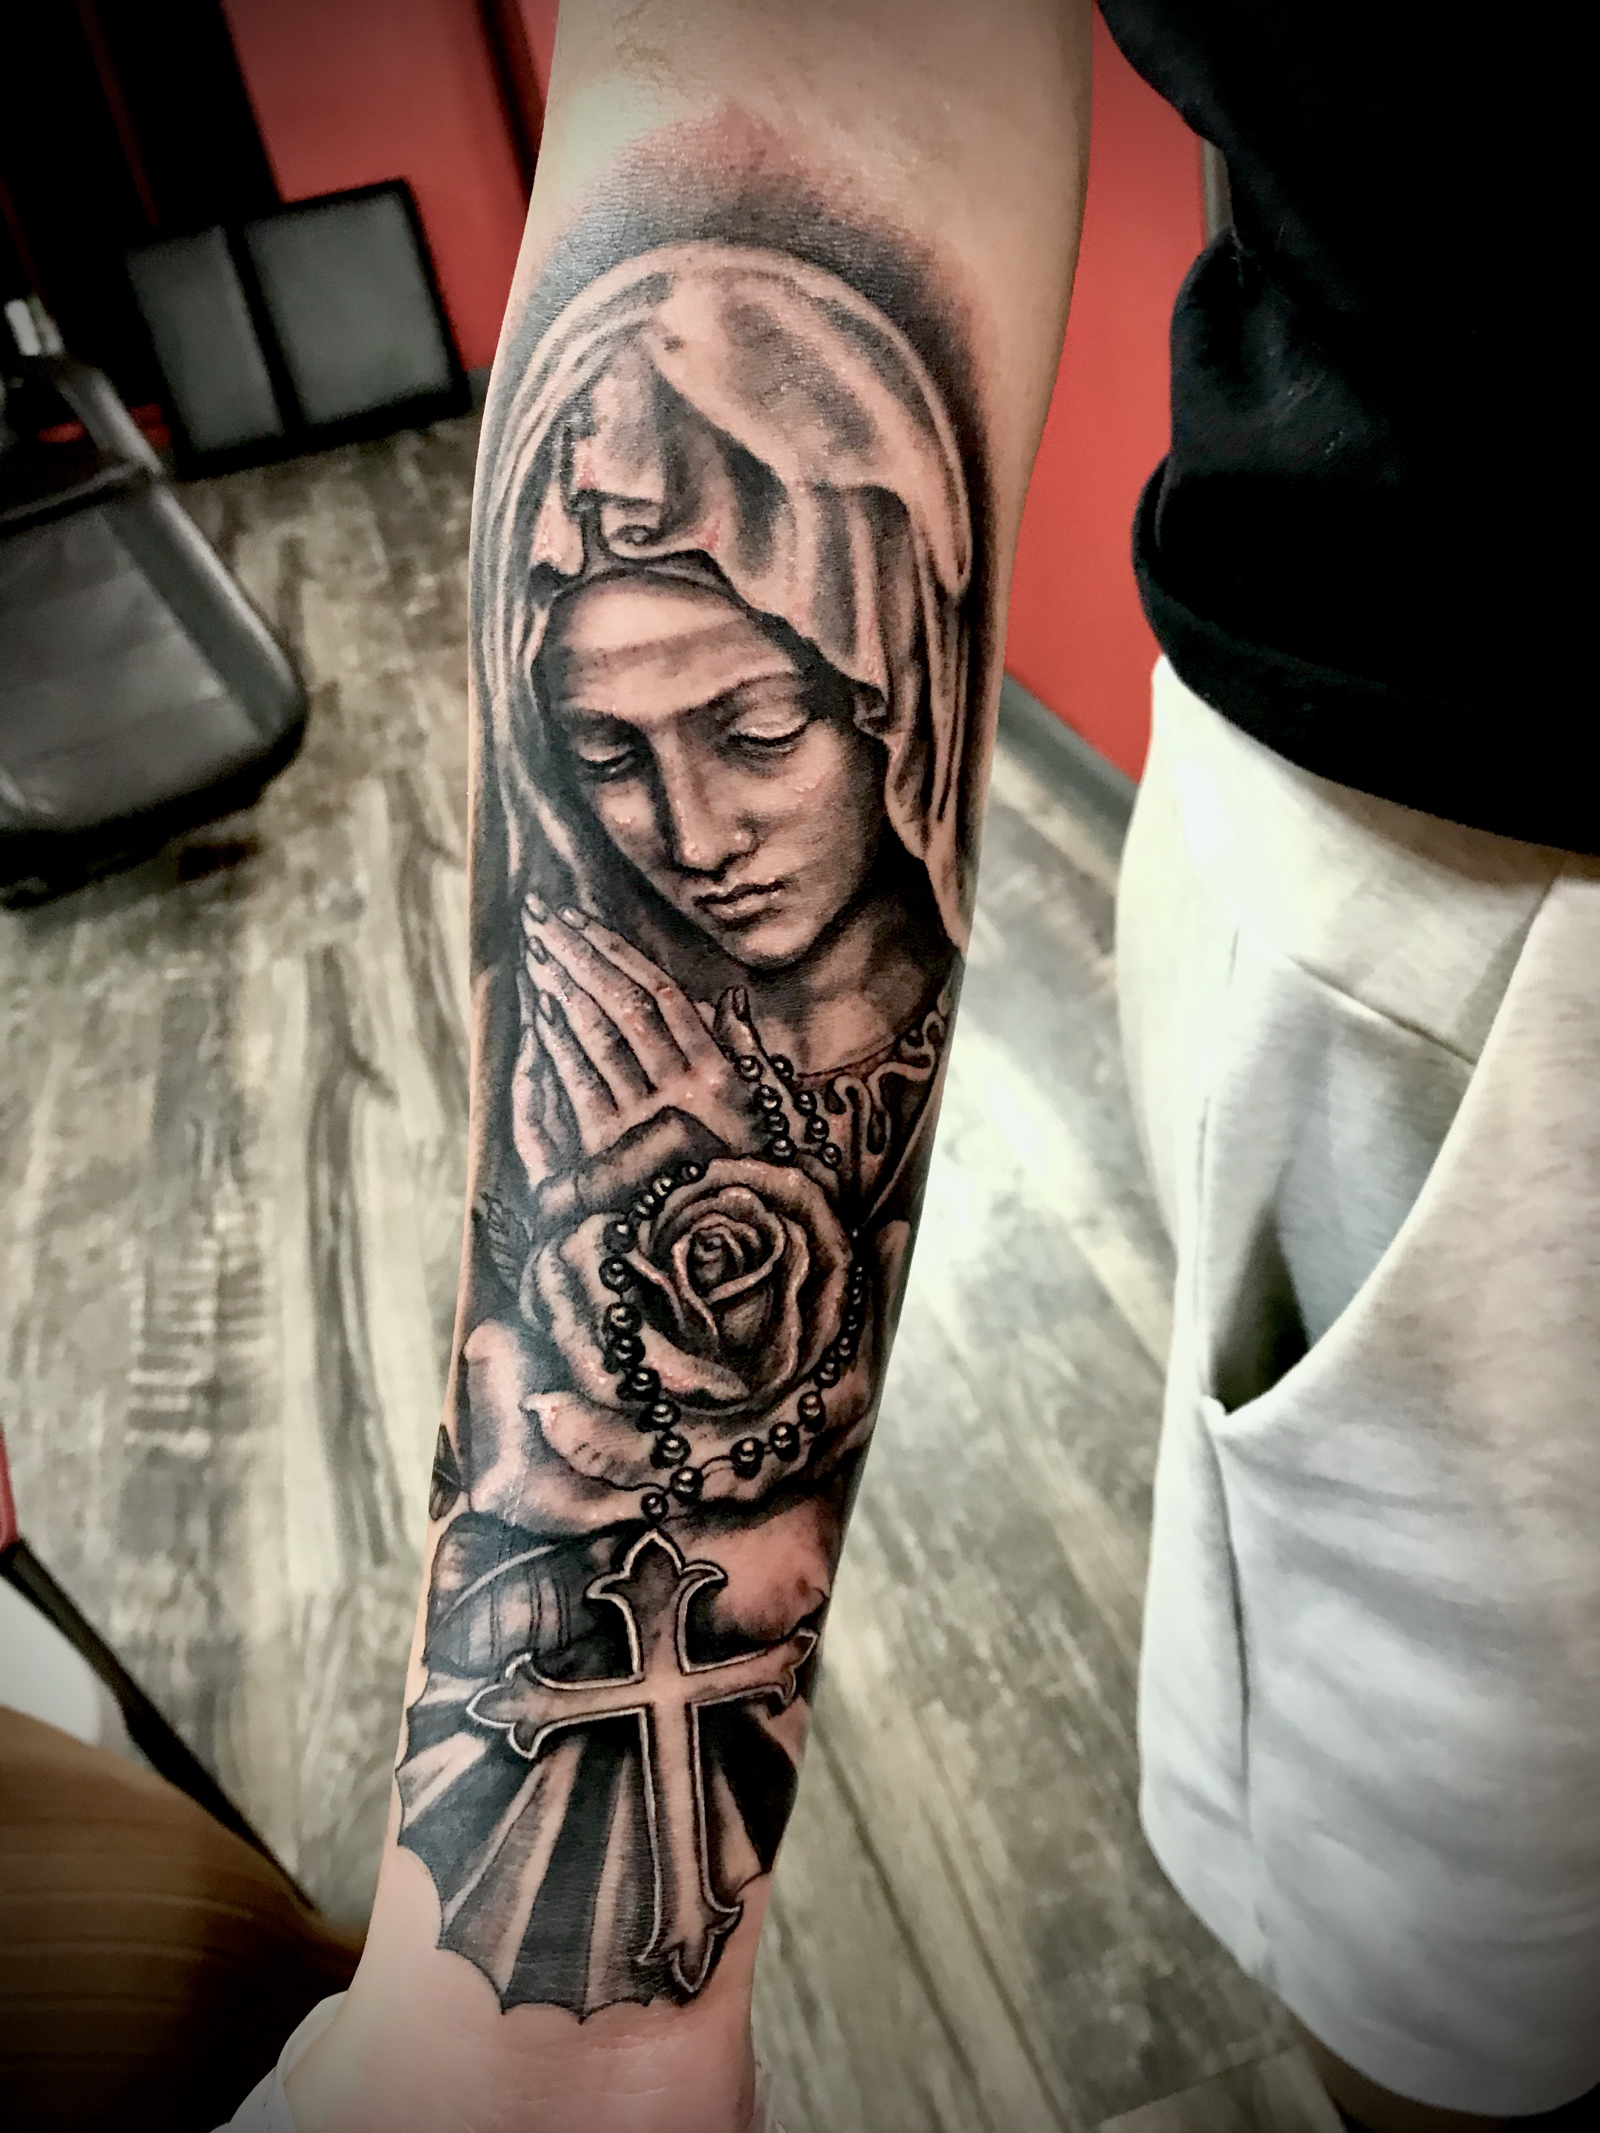 InkArt Tattoo Studio  Sleaford Reviews and Appointments  GetInked